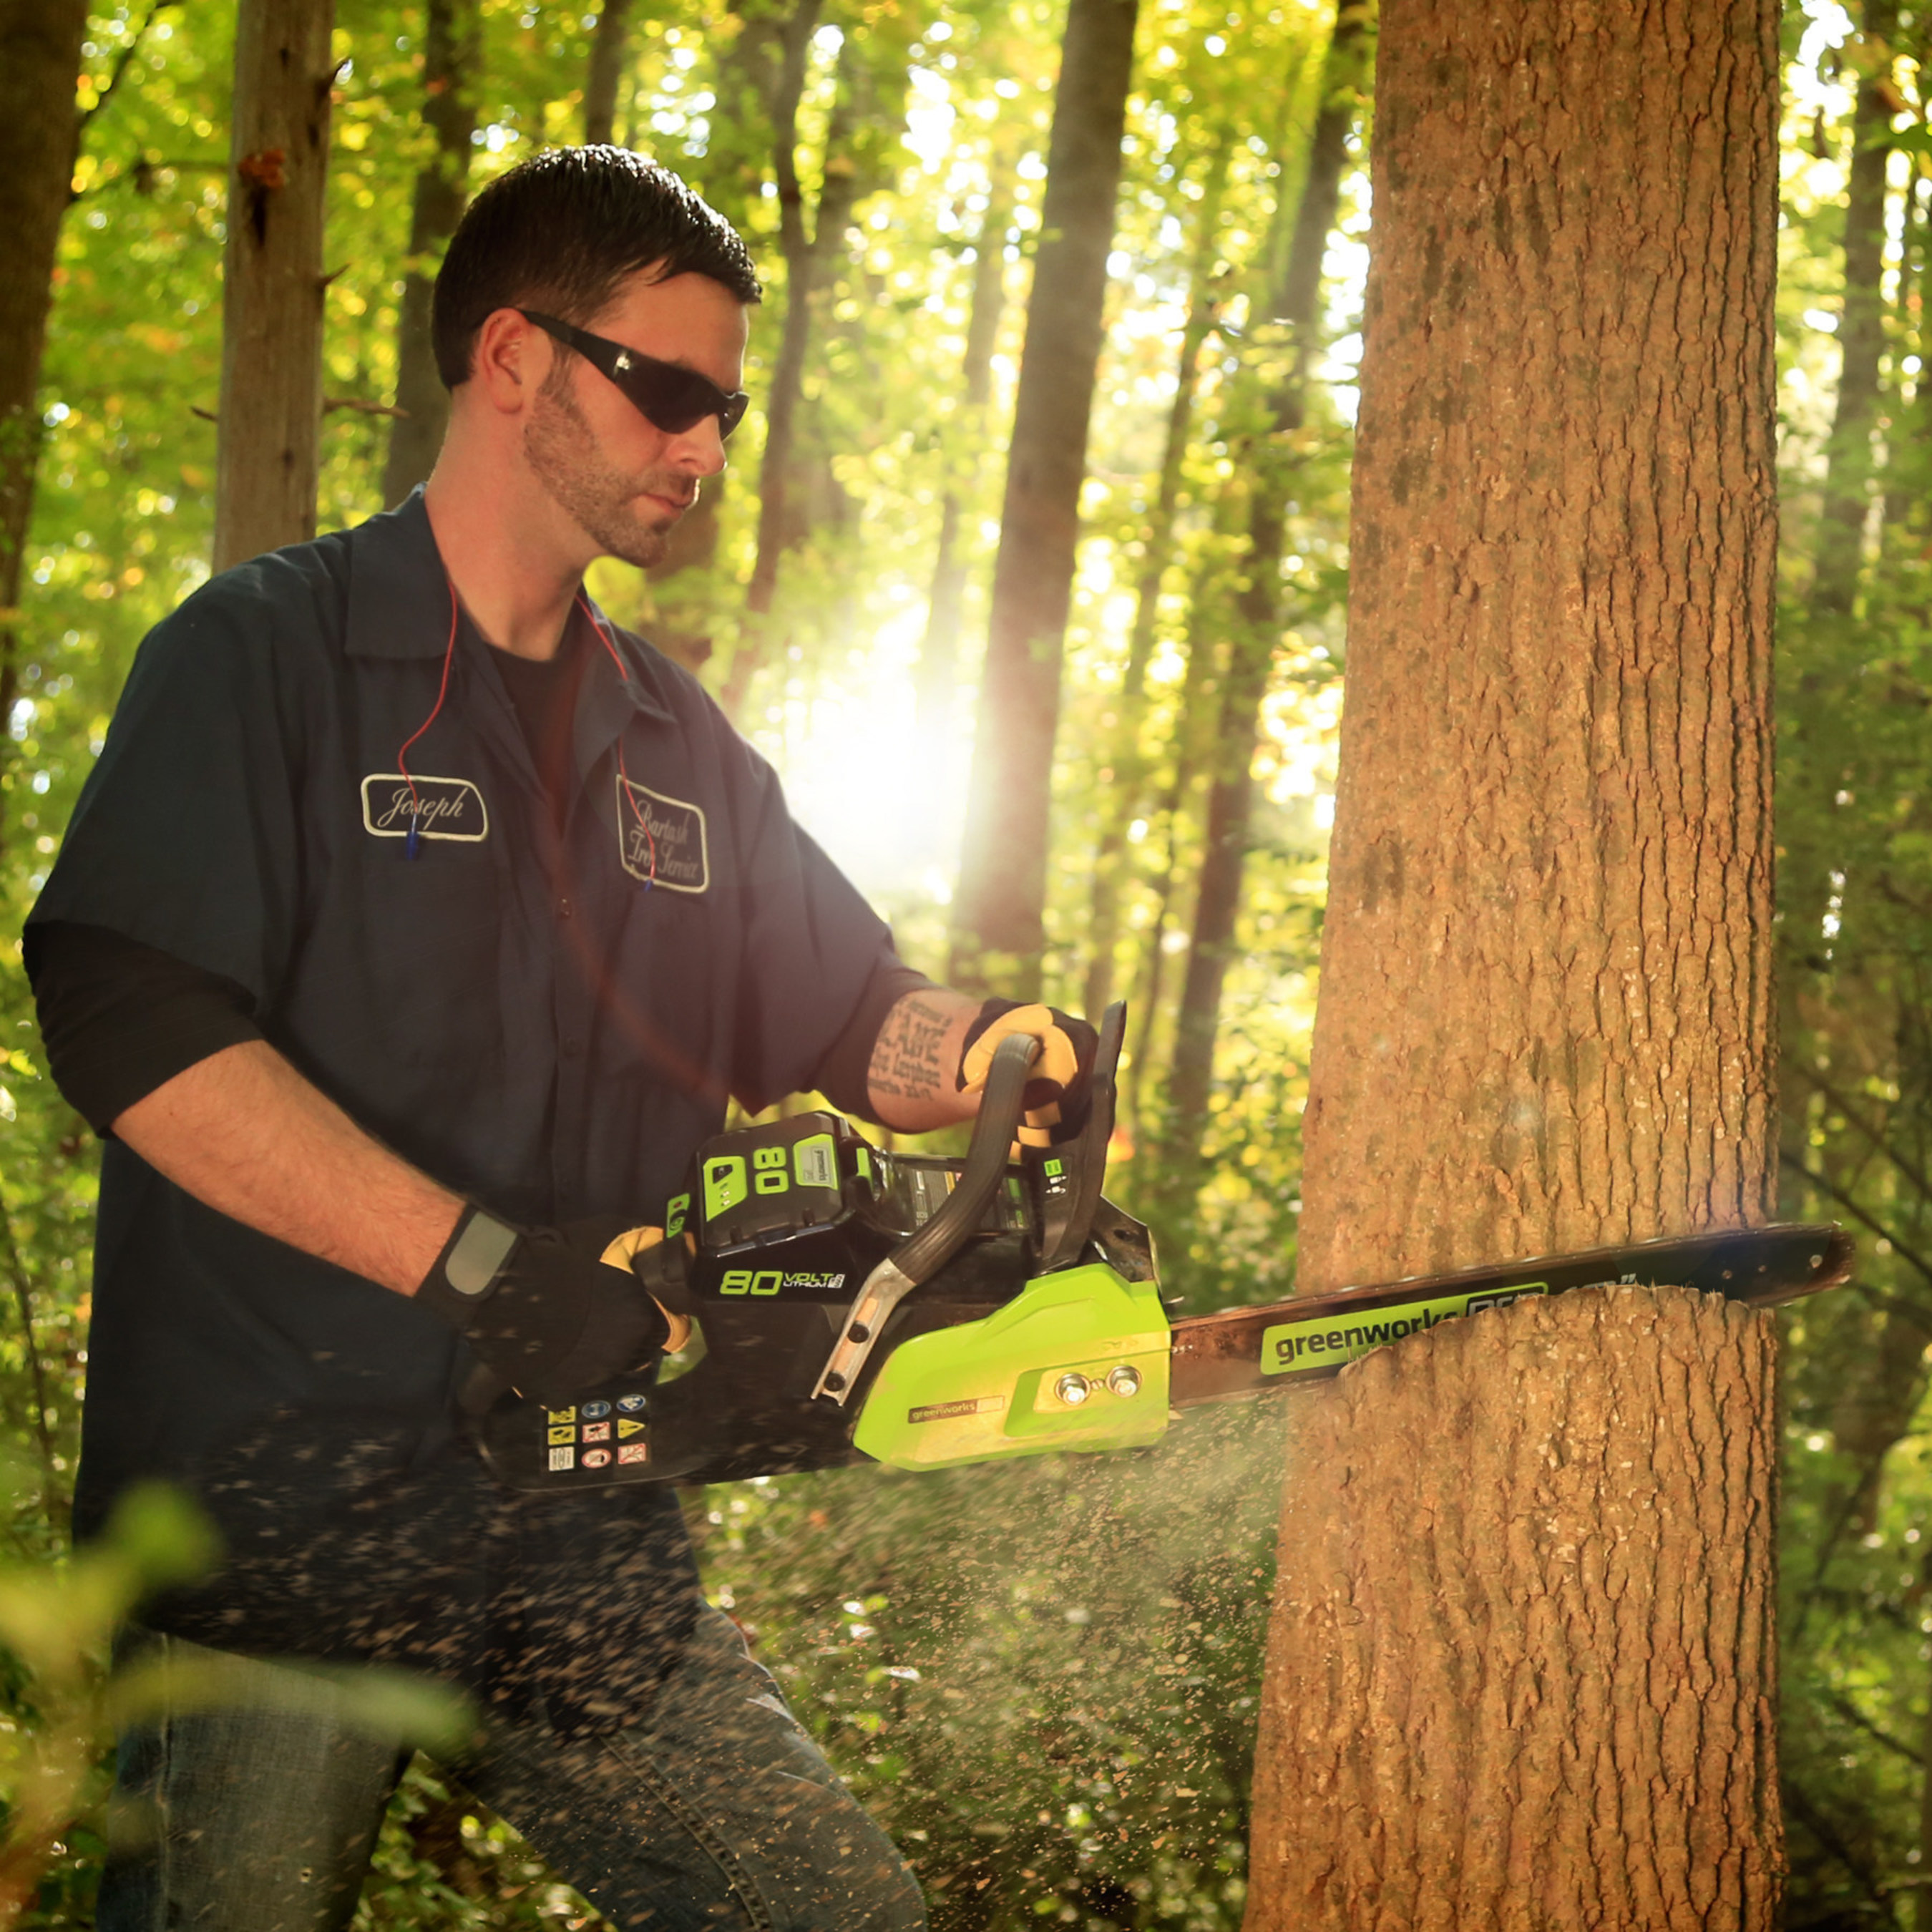 GreenWorks Pro delivers gas-comparable power and performance without the high cost of gas and oil, which means no more tune-ups, maintenance or emissions. The 80V Chain Saw is an industry-leading 18" bar and chain; delivers 2.7hp, equivalent to a 42cc gas-powered saw; digital controlled brushless motor for more torque; electronic chain brake for safe operation.  Minimal vibration and noise.